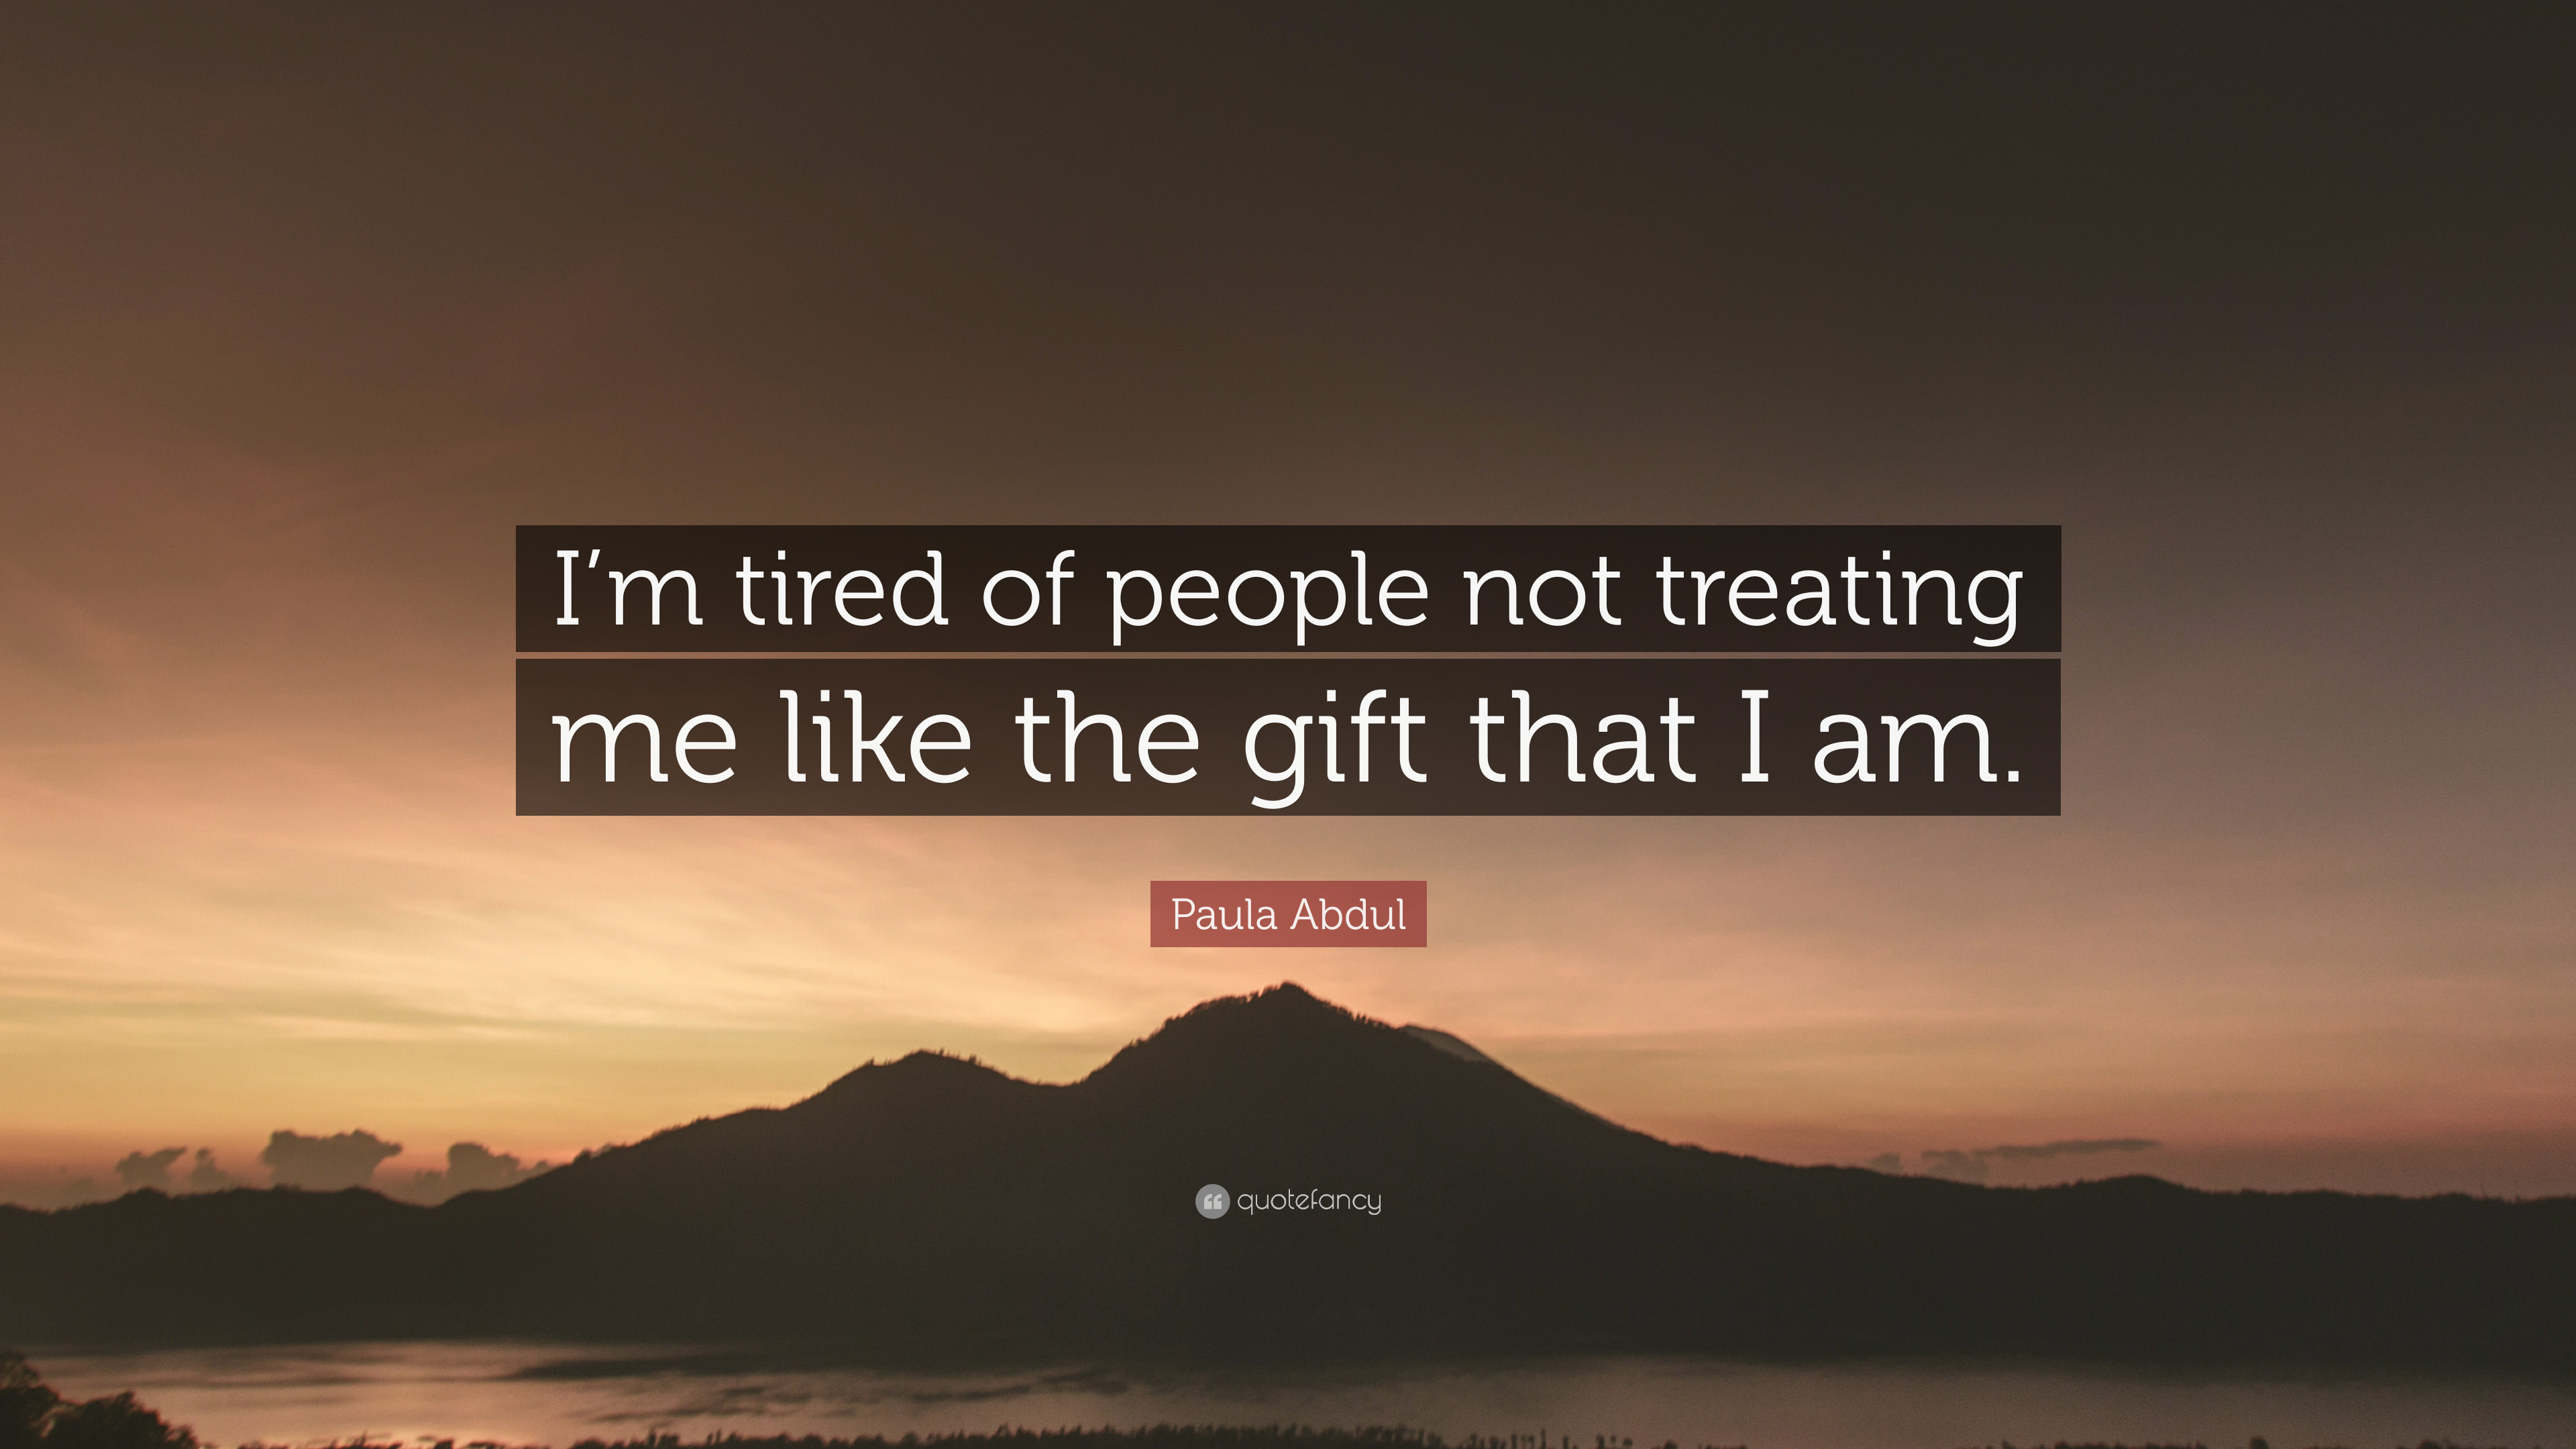 4428974-Paula-Abdul-Quote-I-m-tired-of-people-not-treating-me-like-the.jpg